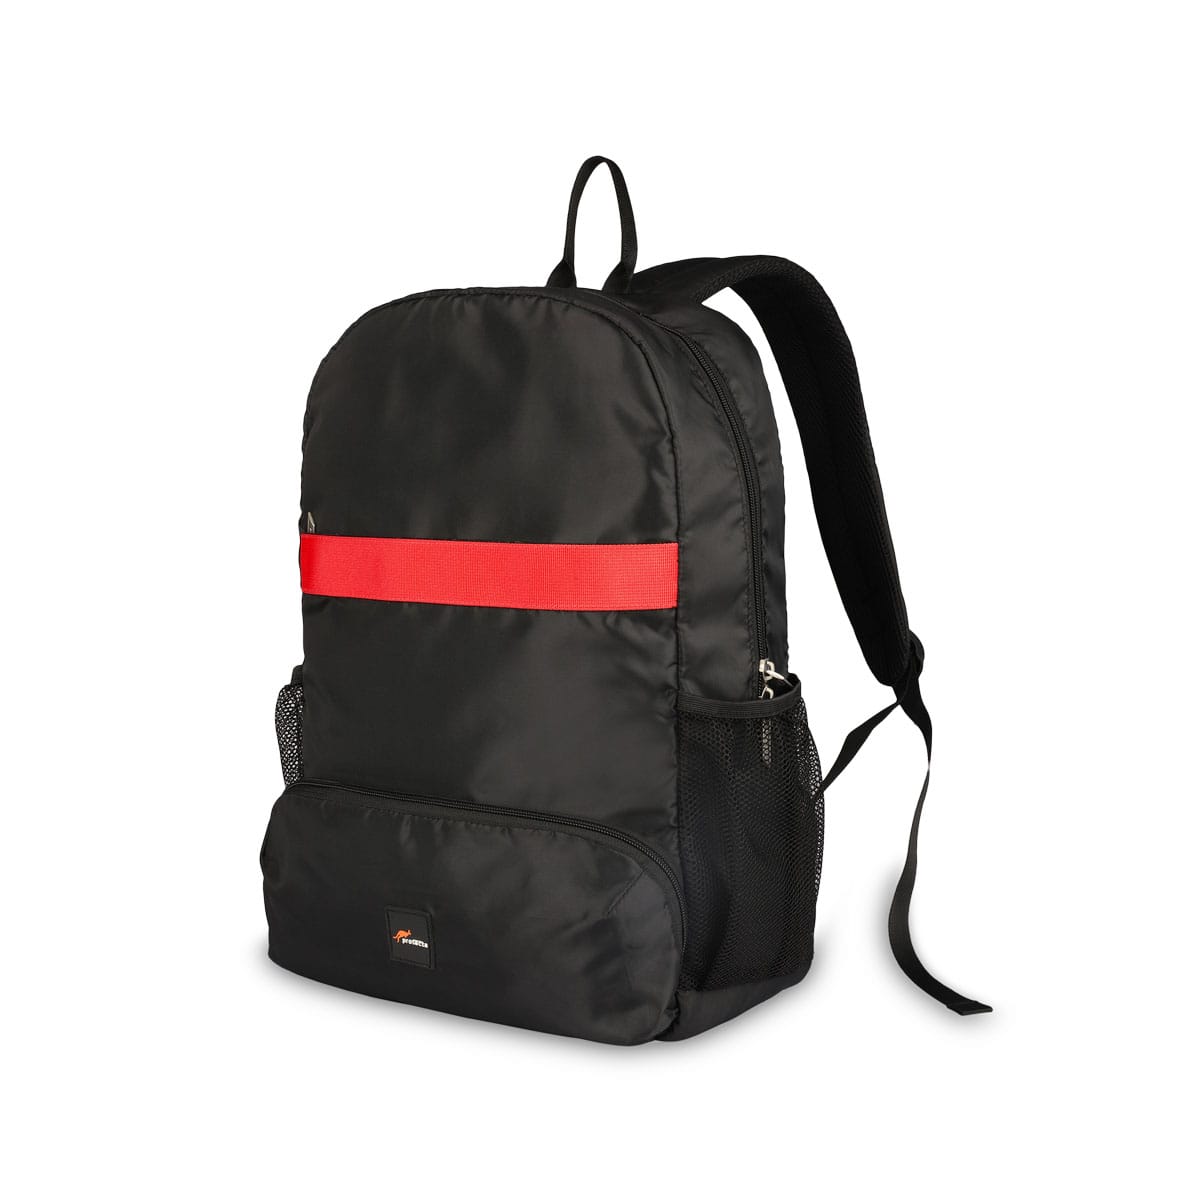 Black-Red | Protecta Triumph Laptop Backpack-Main